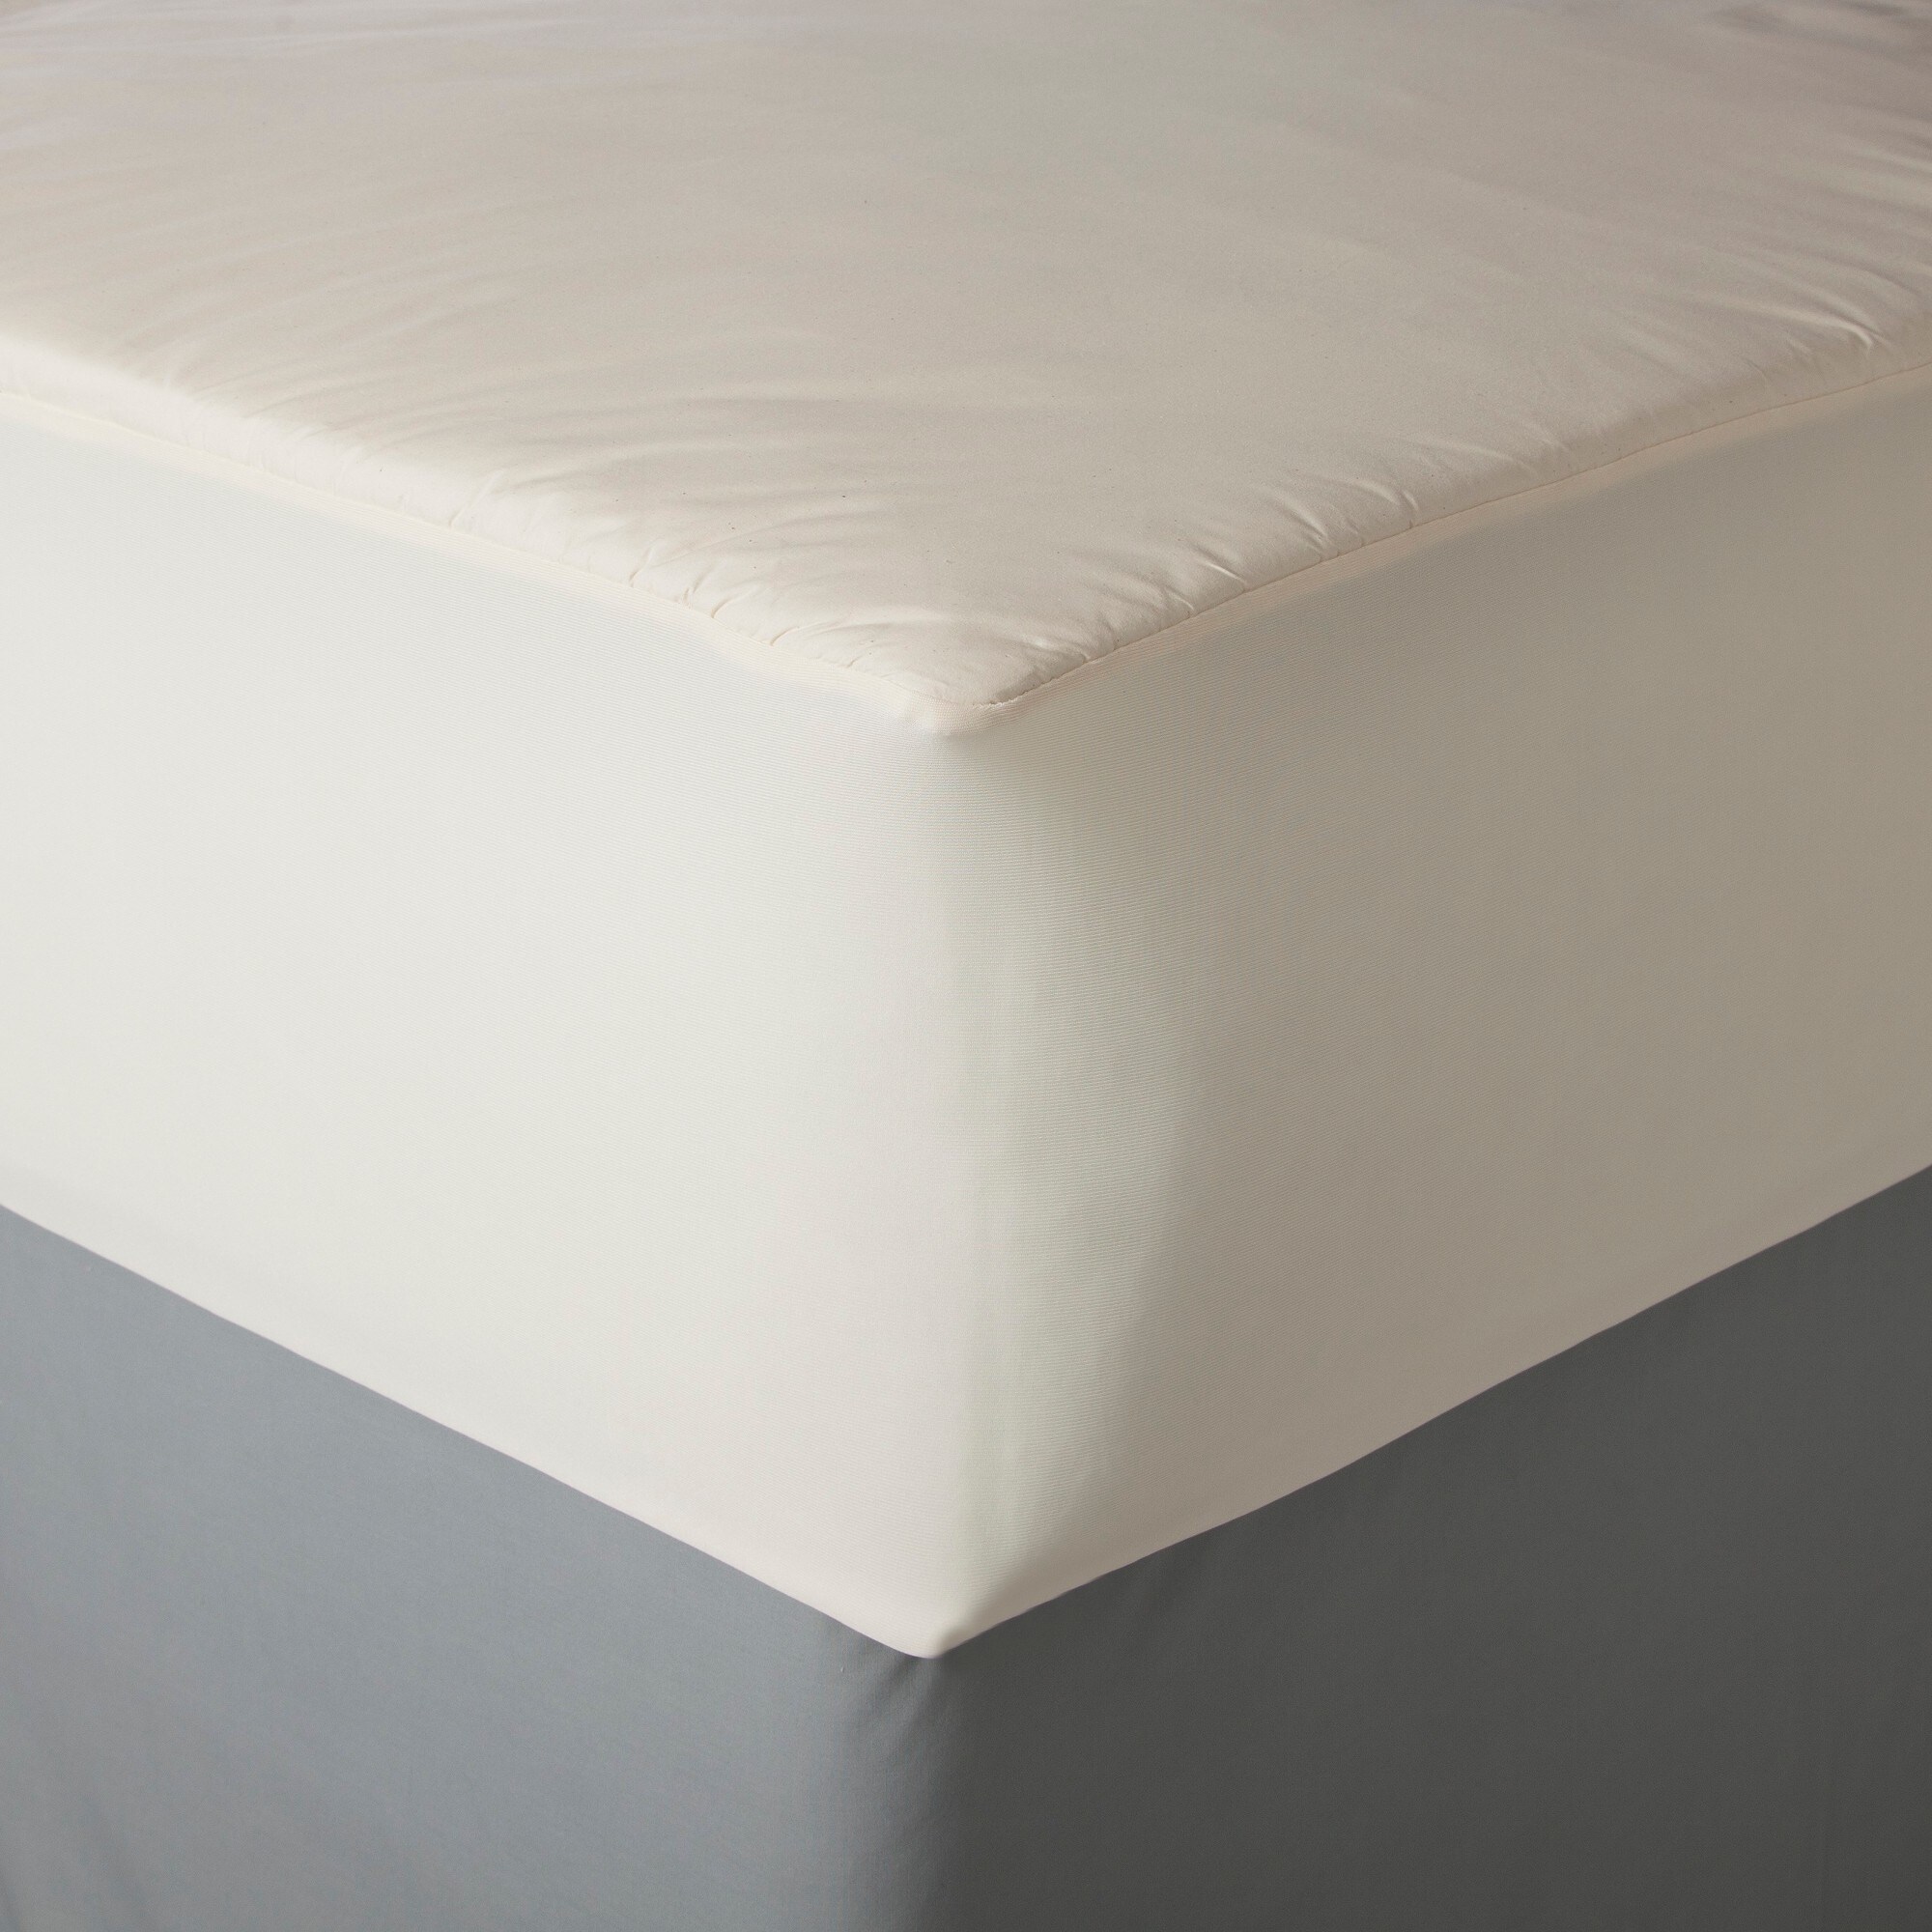 https://ak1.ostkcdn.com/images/products/is/images/direct/0e617f2e5b816b238508570cd30ee8308dfd2b22/AllerEase-Organic-Cotton-Top-Mattress-Pad.jpg